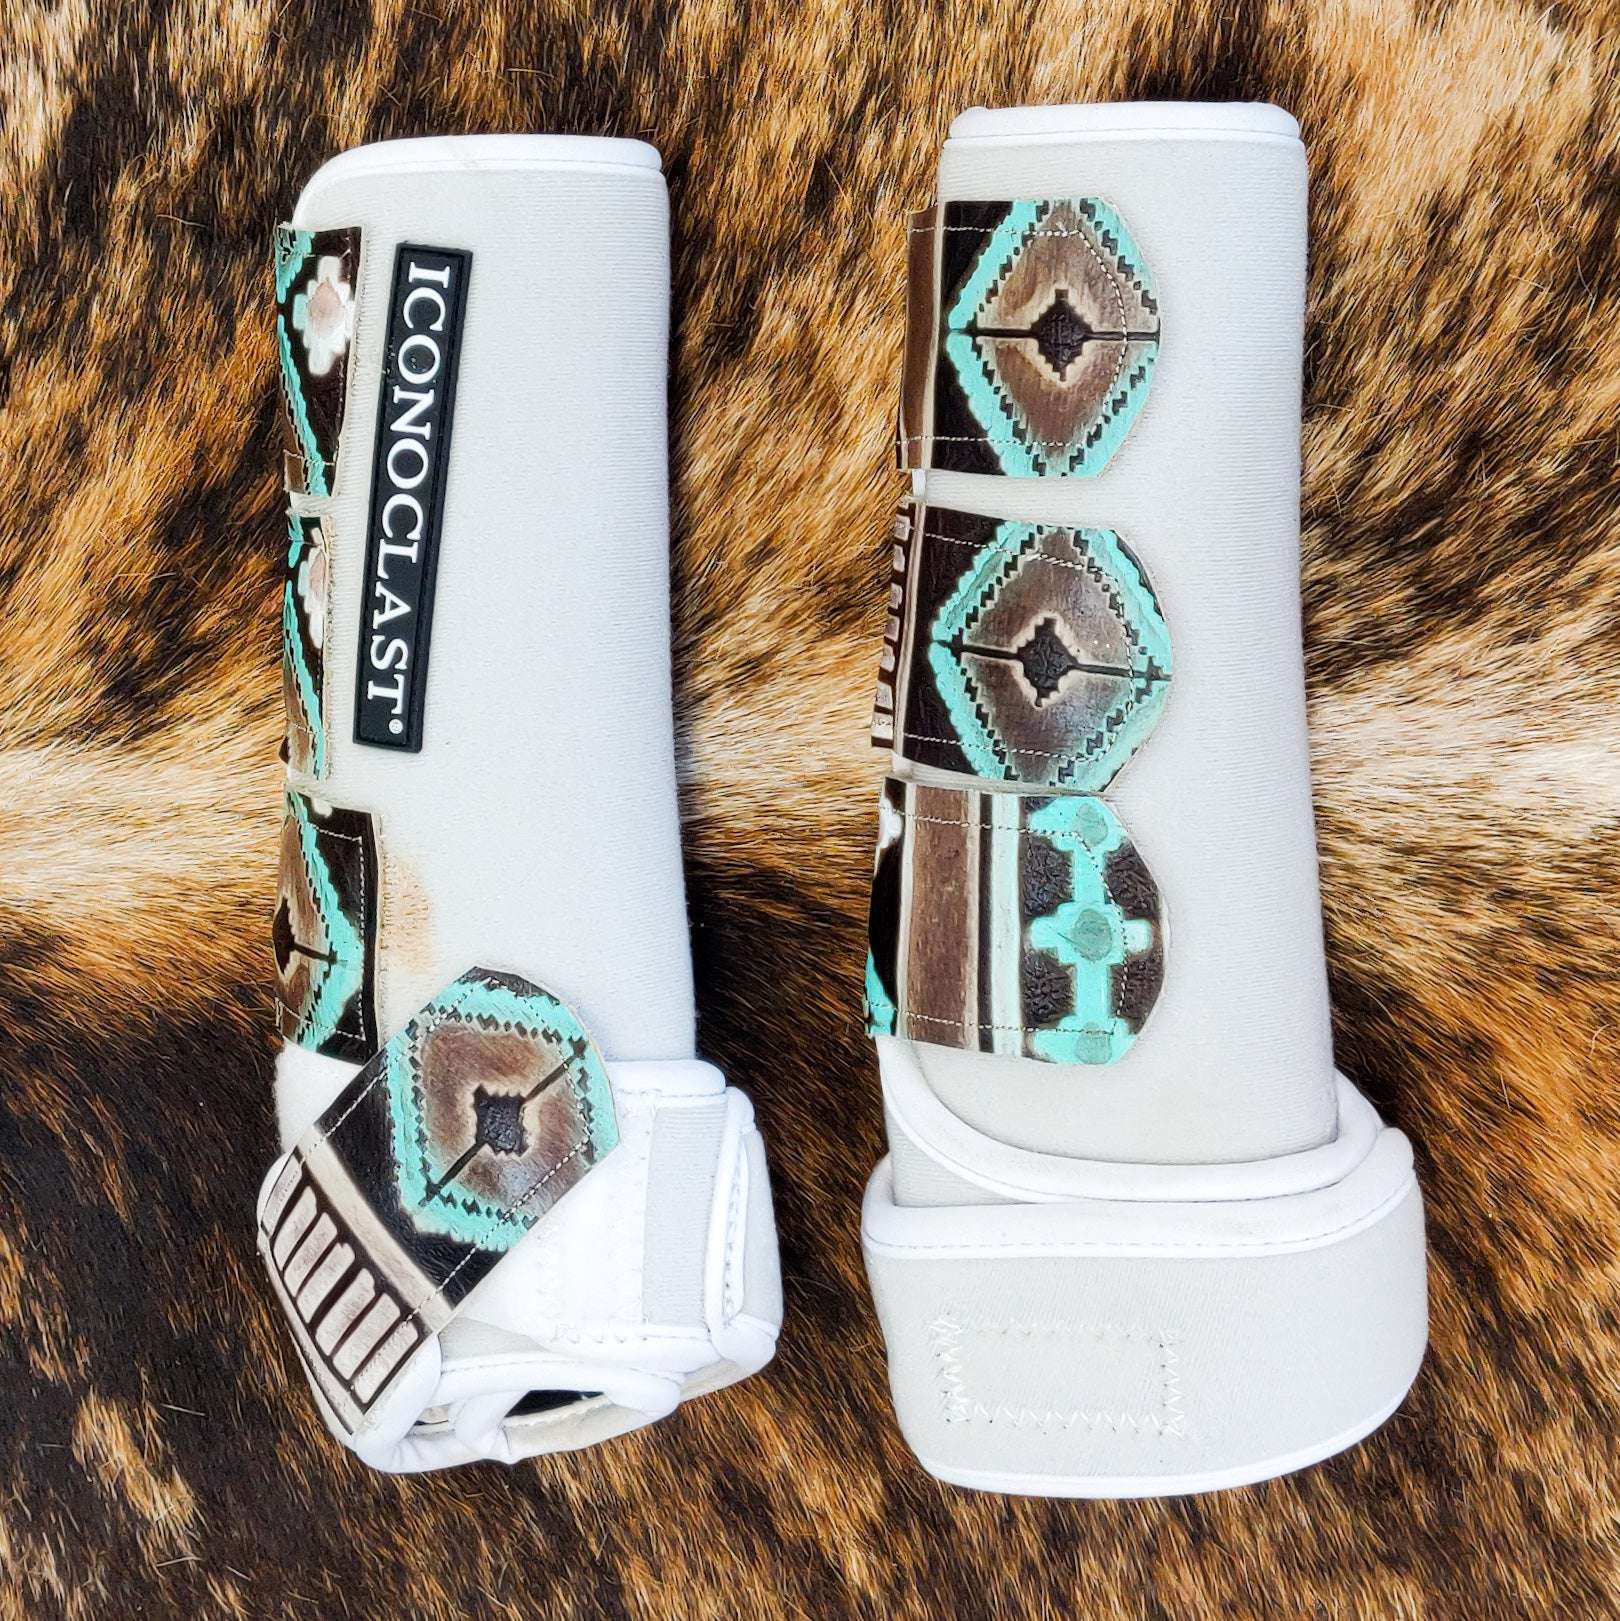 Leather Strap Boots - Turquoise Aztec - The Glamorous Cowgirl